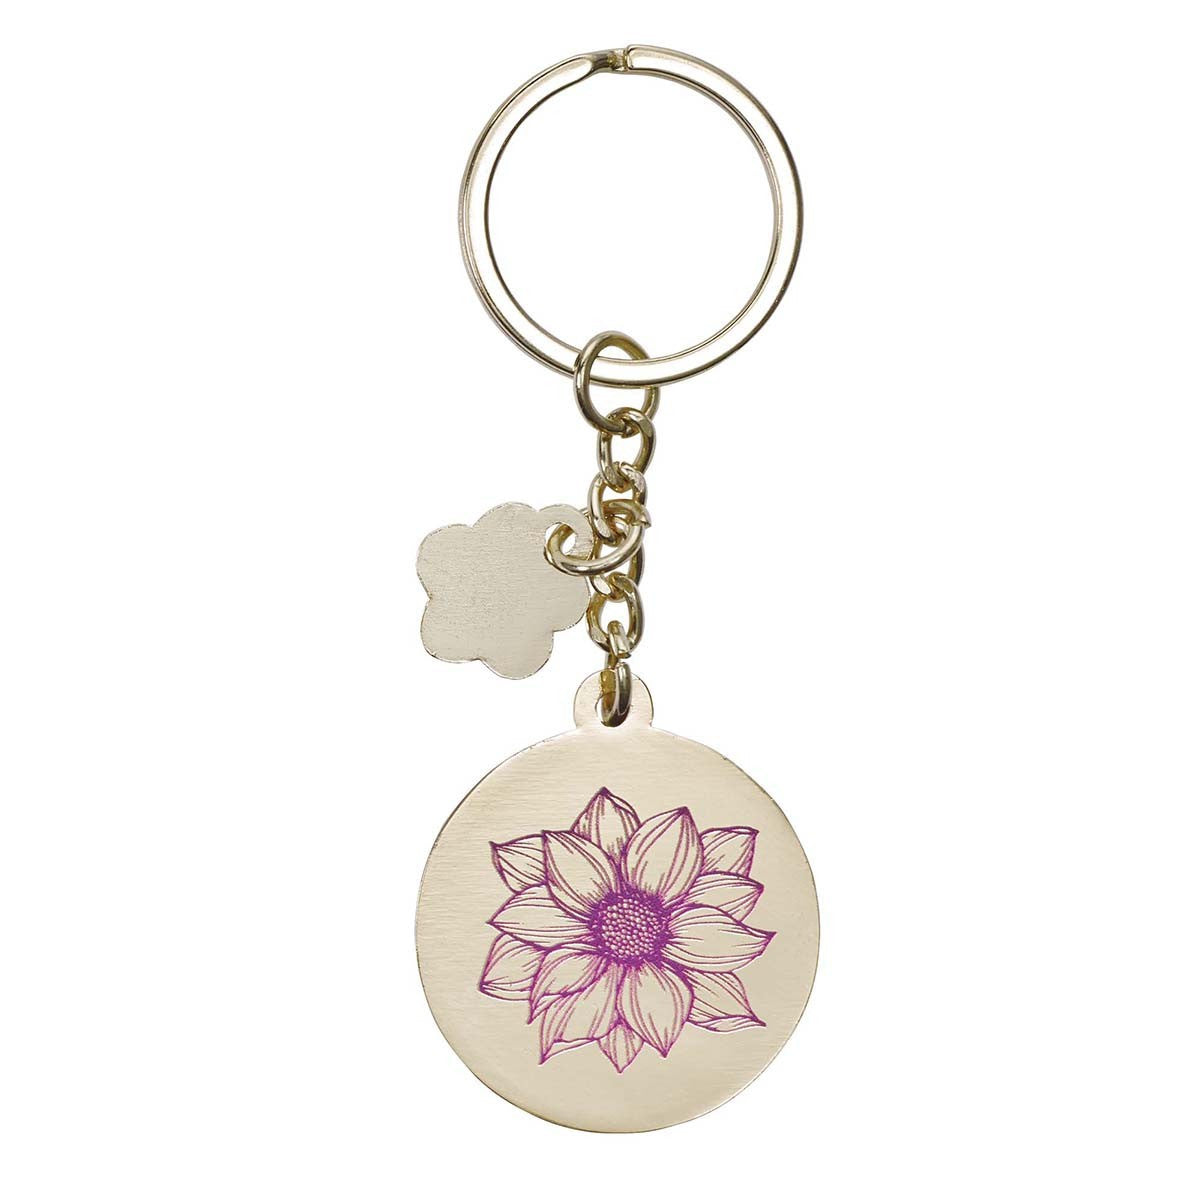 Grow in Grace Metal Key Ring with Link Chain - The Christian Gift Company